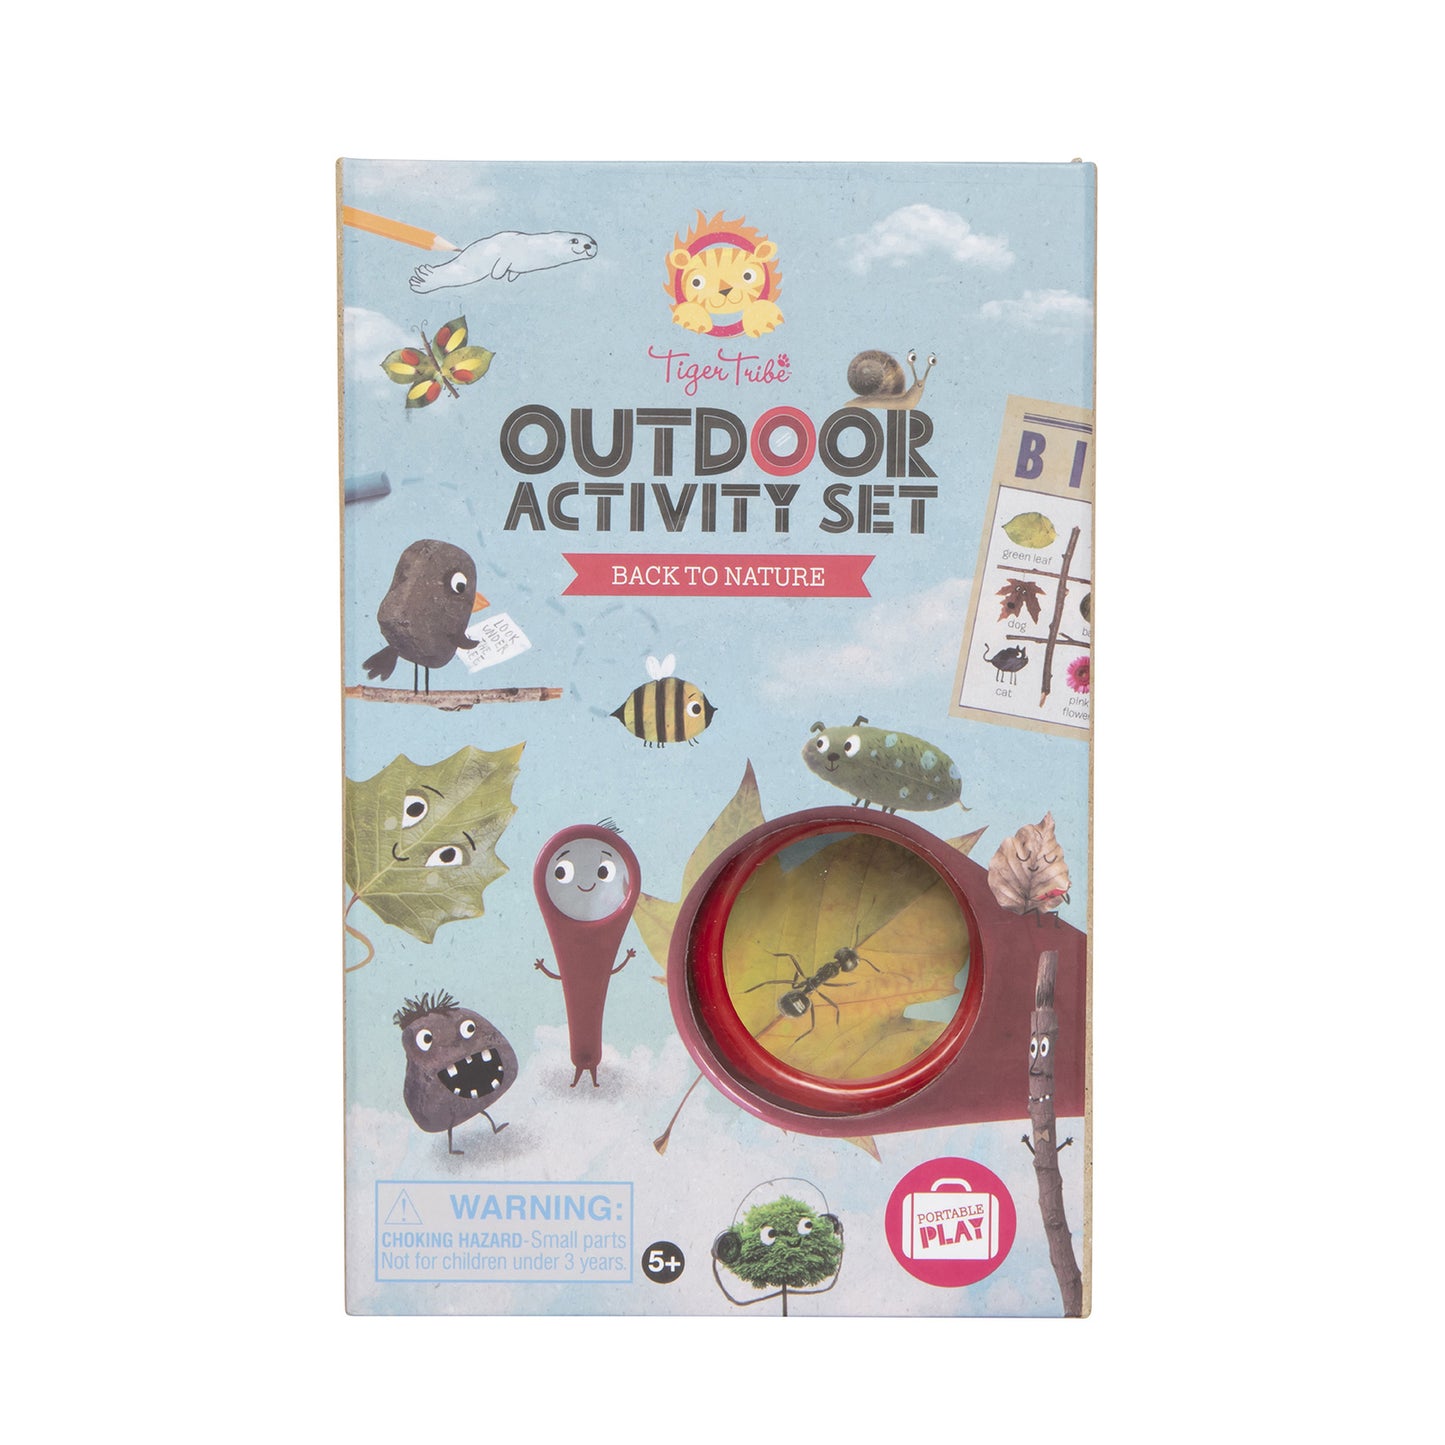 Tiger Tribe - Outdoor Activity Set - Back to Nature